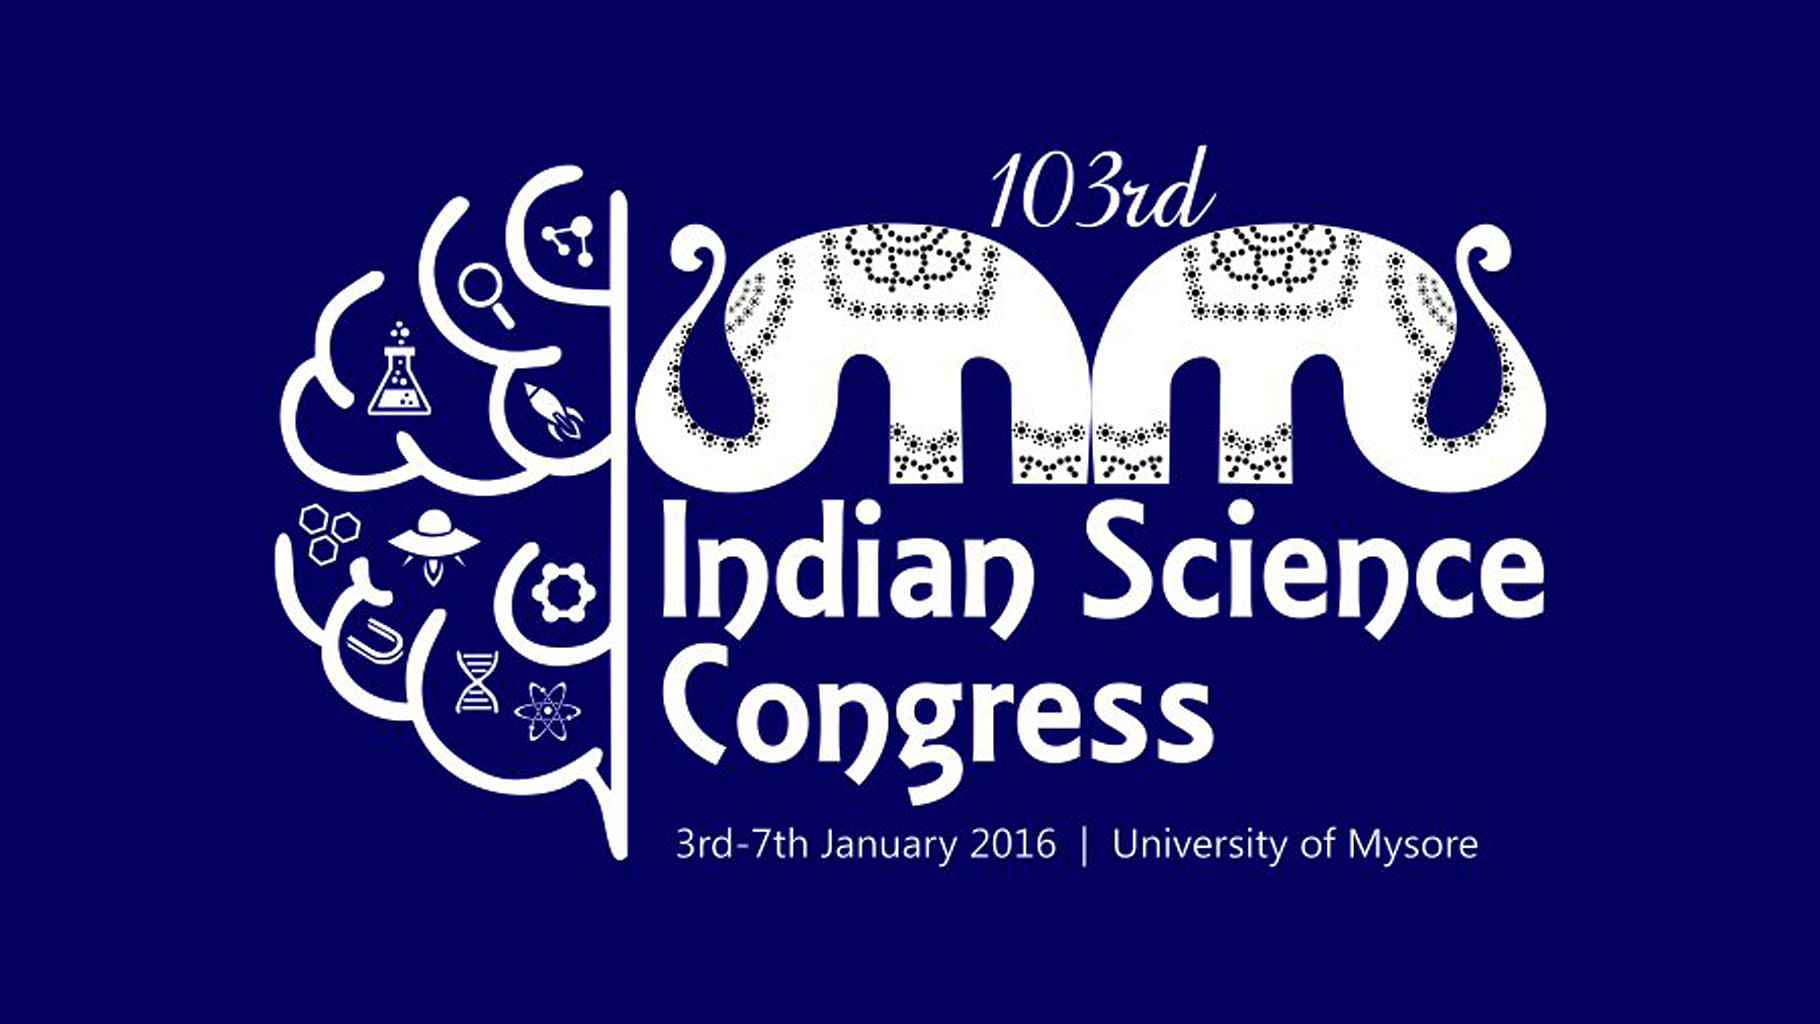 The 103rd Indian Science Congress took place in Mysuru. (Photo: ISC’s <a href="https://twitter.com/103ISC">Twitter page</a>)